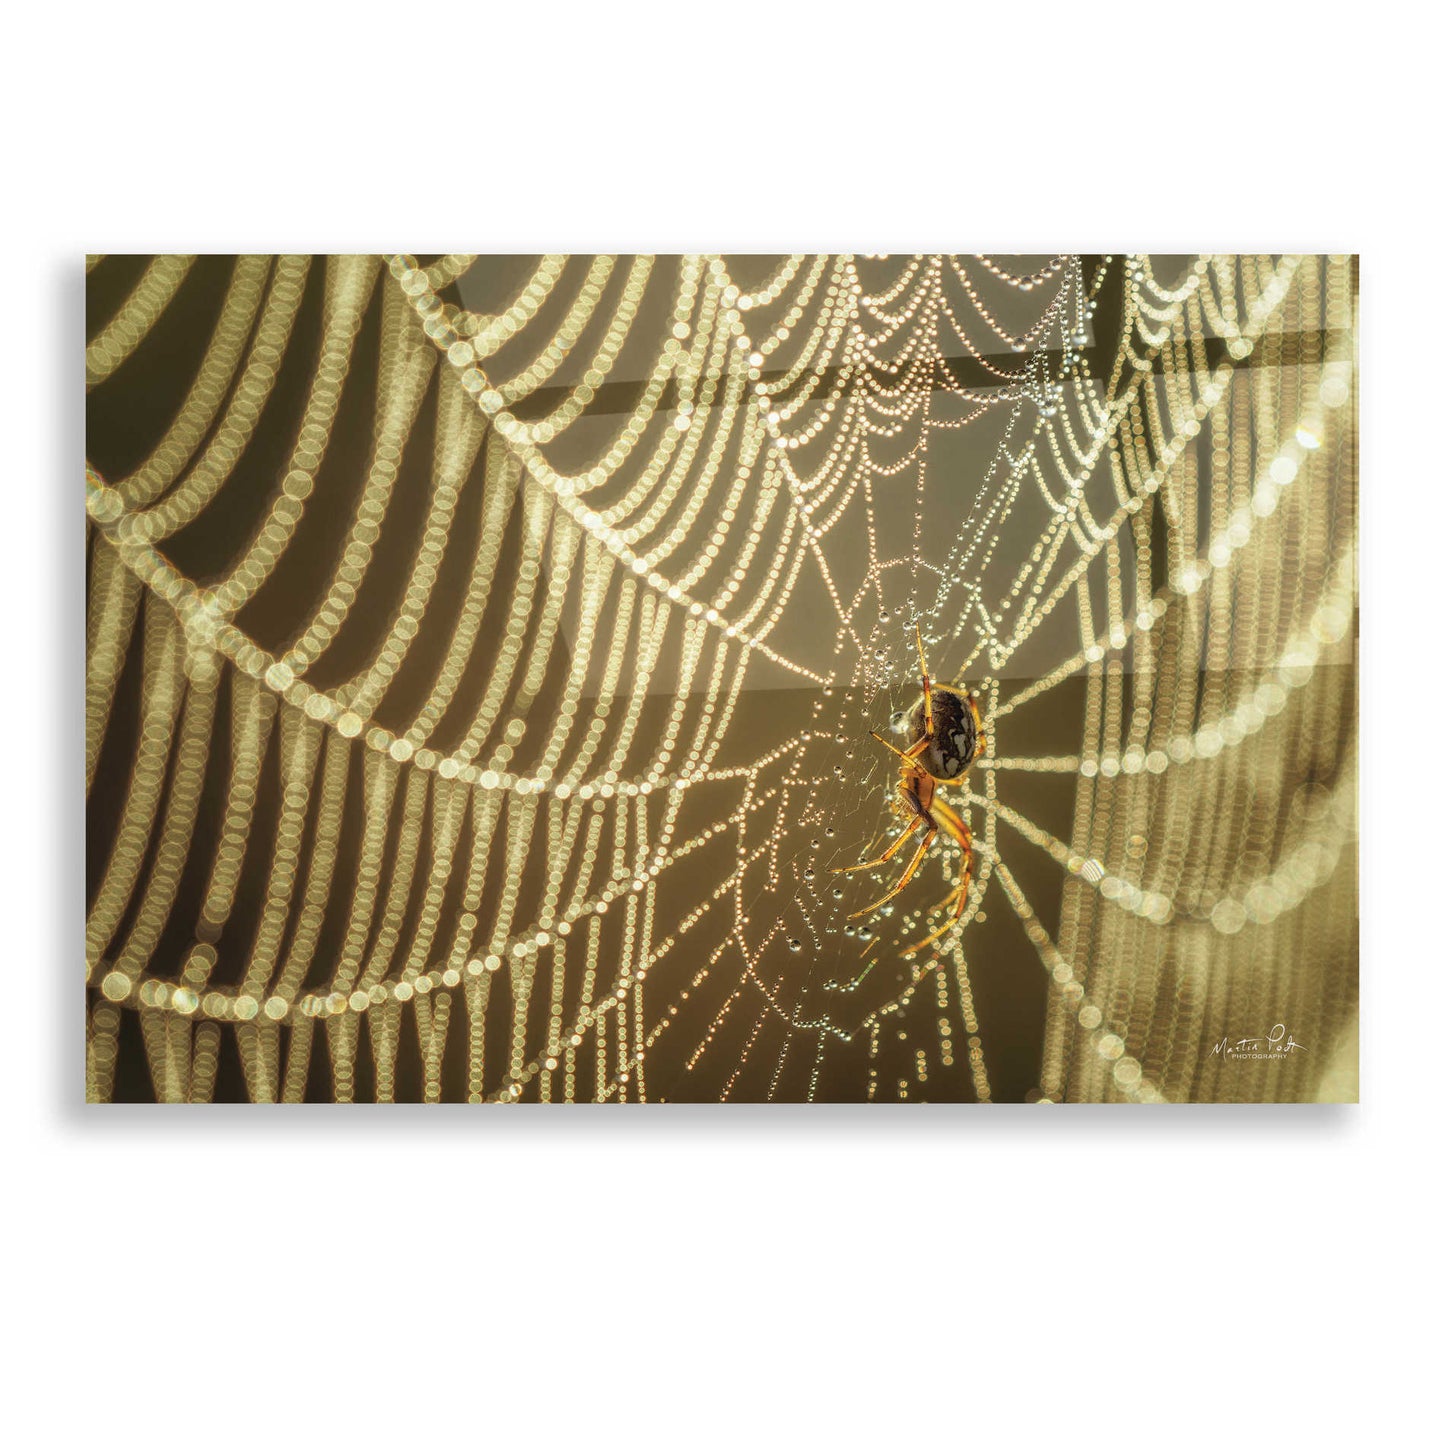 Epic Art 'The Spider and Her Jewels' by Martin Podt, Acrylic Glass Wall Art,16x12